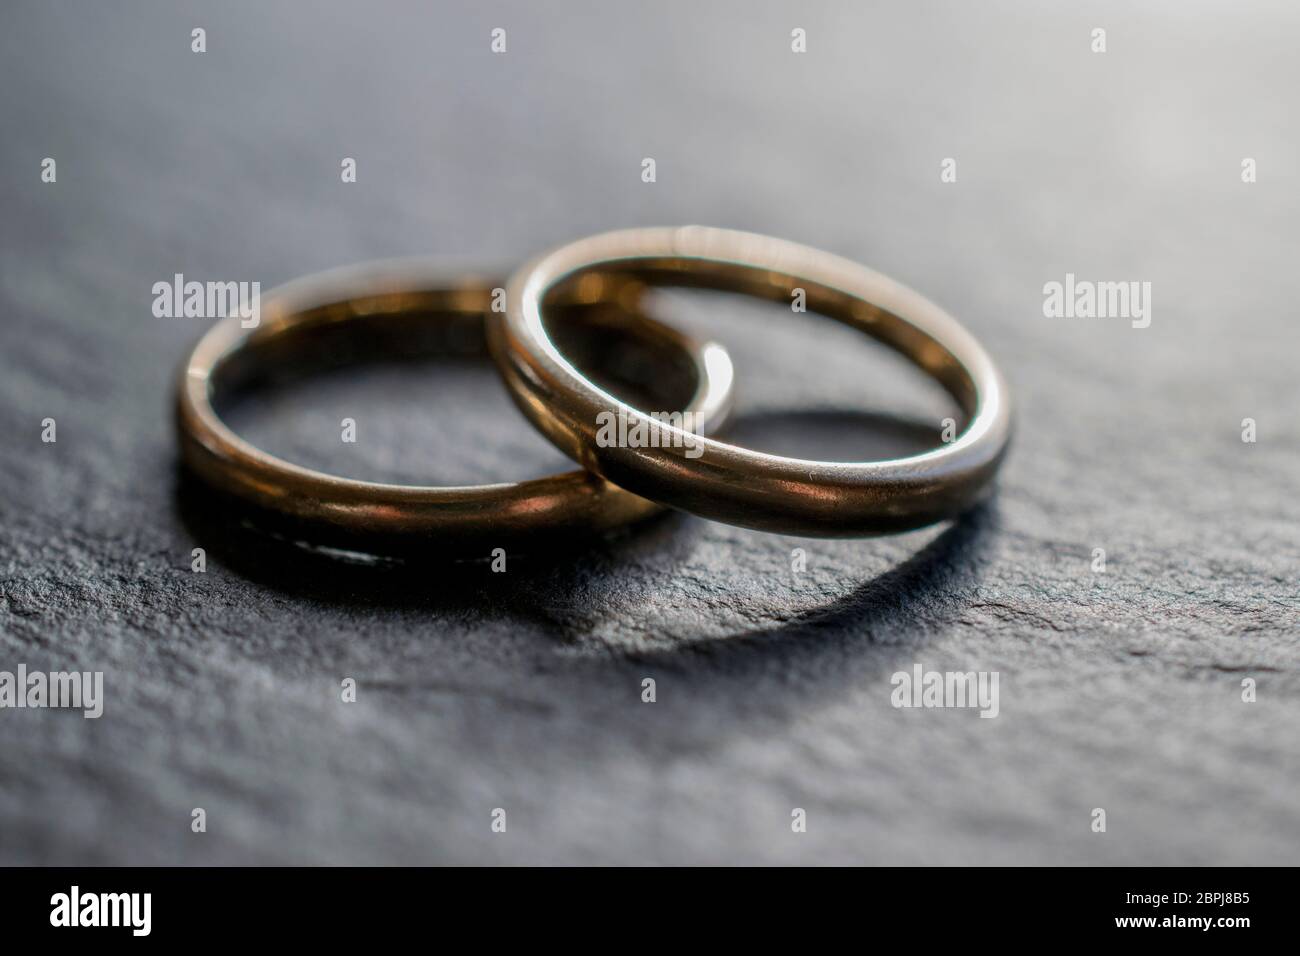 Two gold wedding bands overlapping on a slate tile Stock Photo